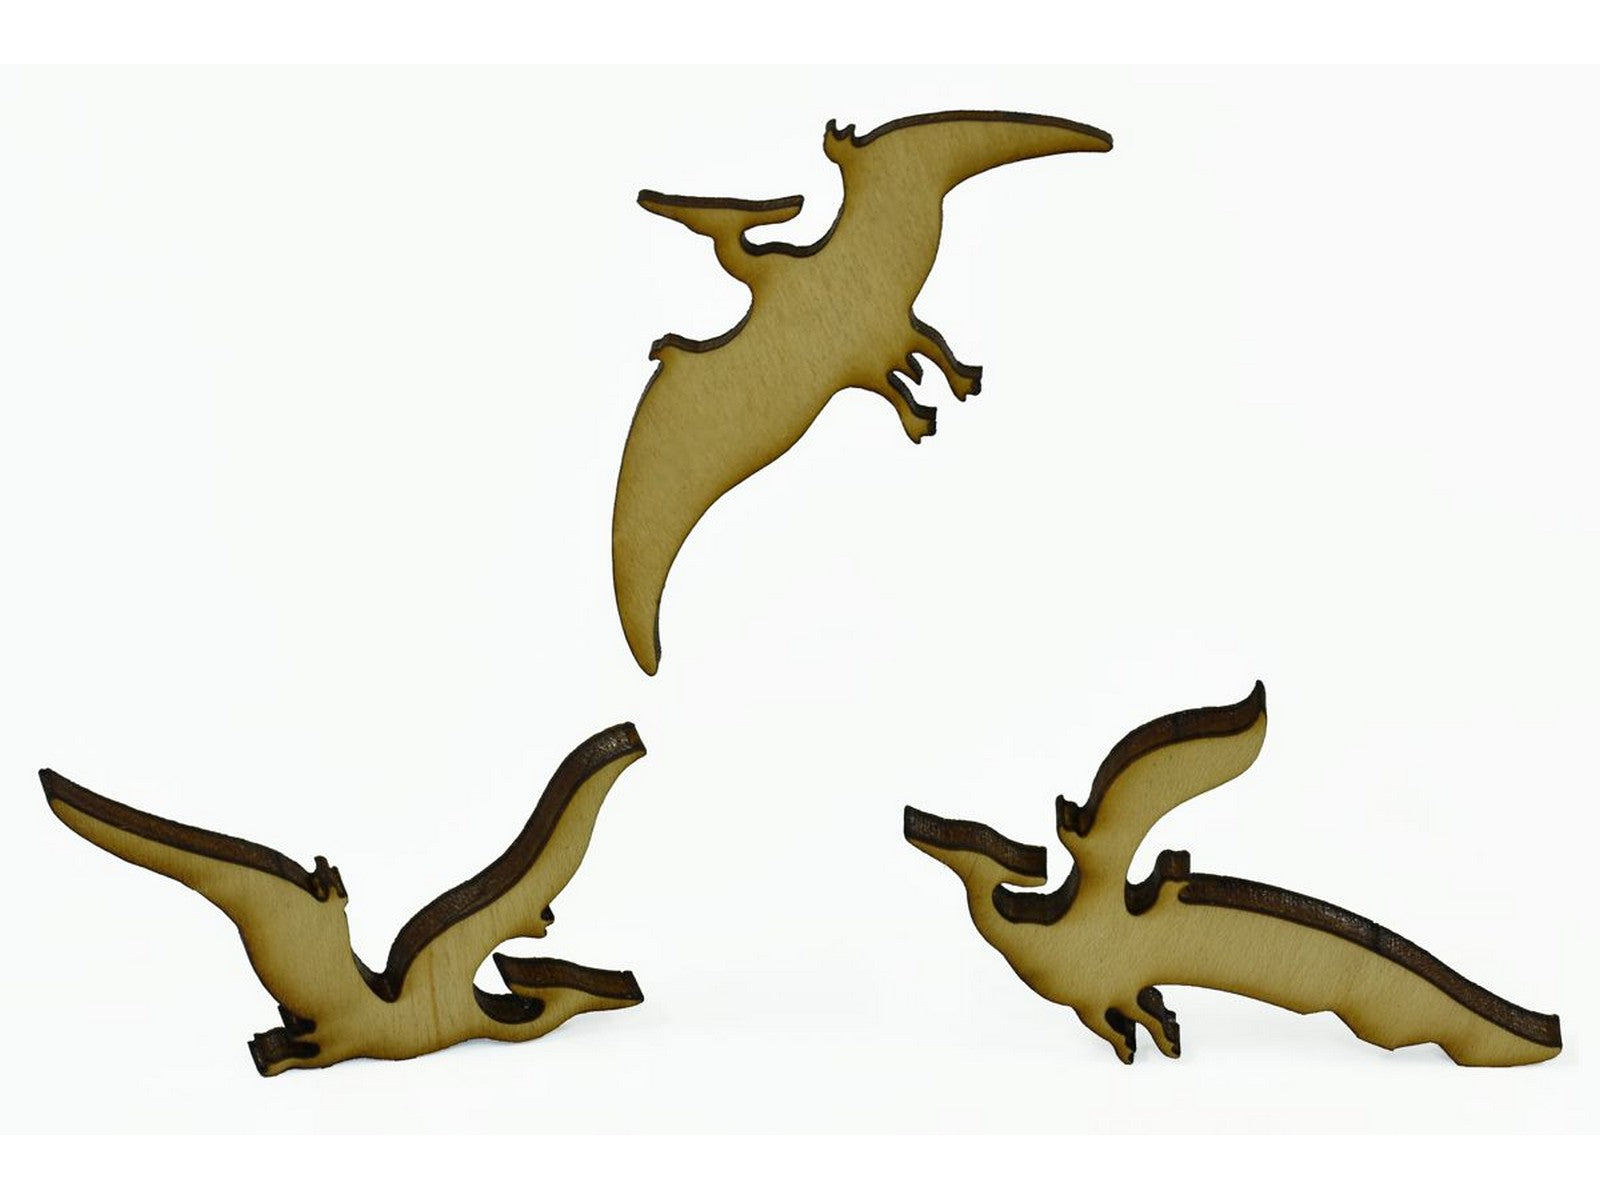 A closeup of pieces shaped like Pterodactyls.